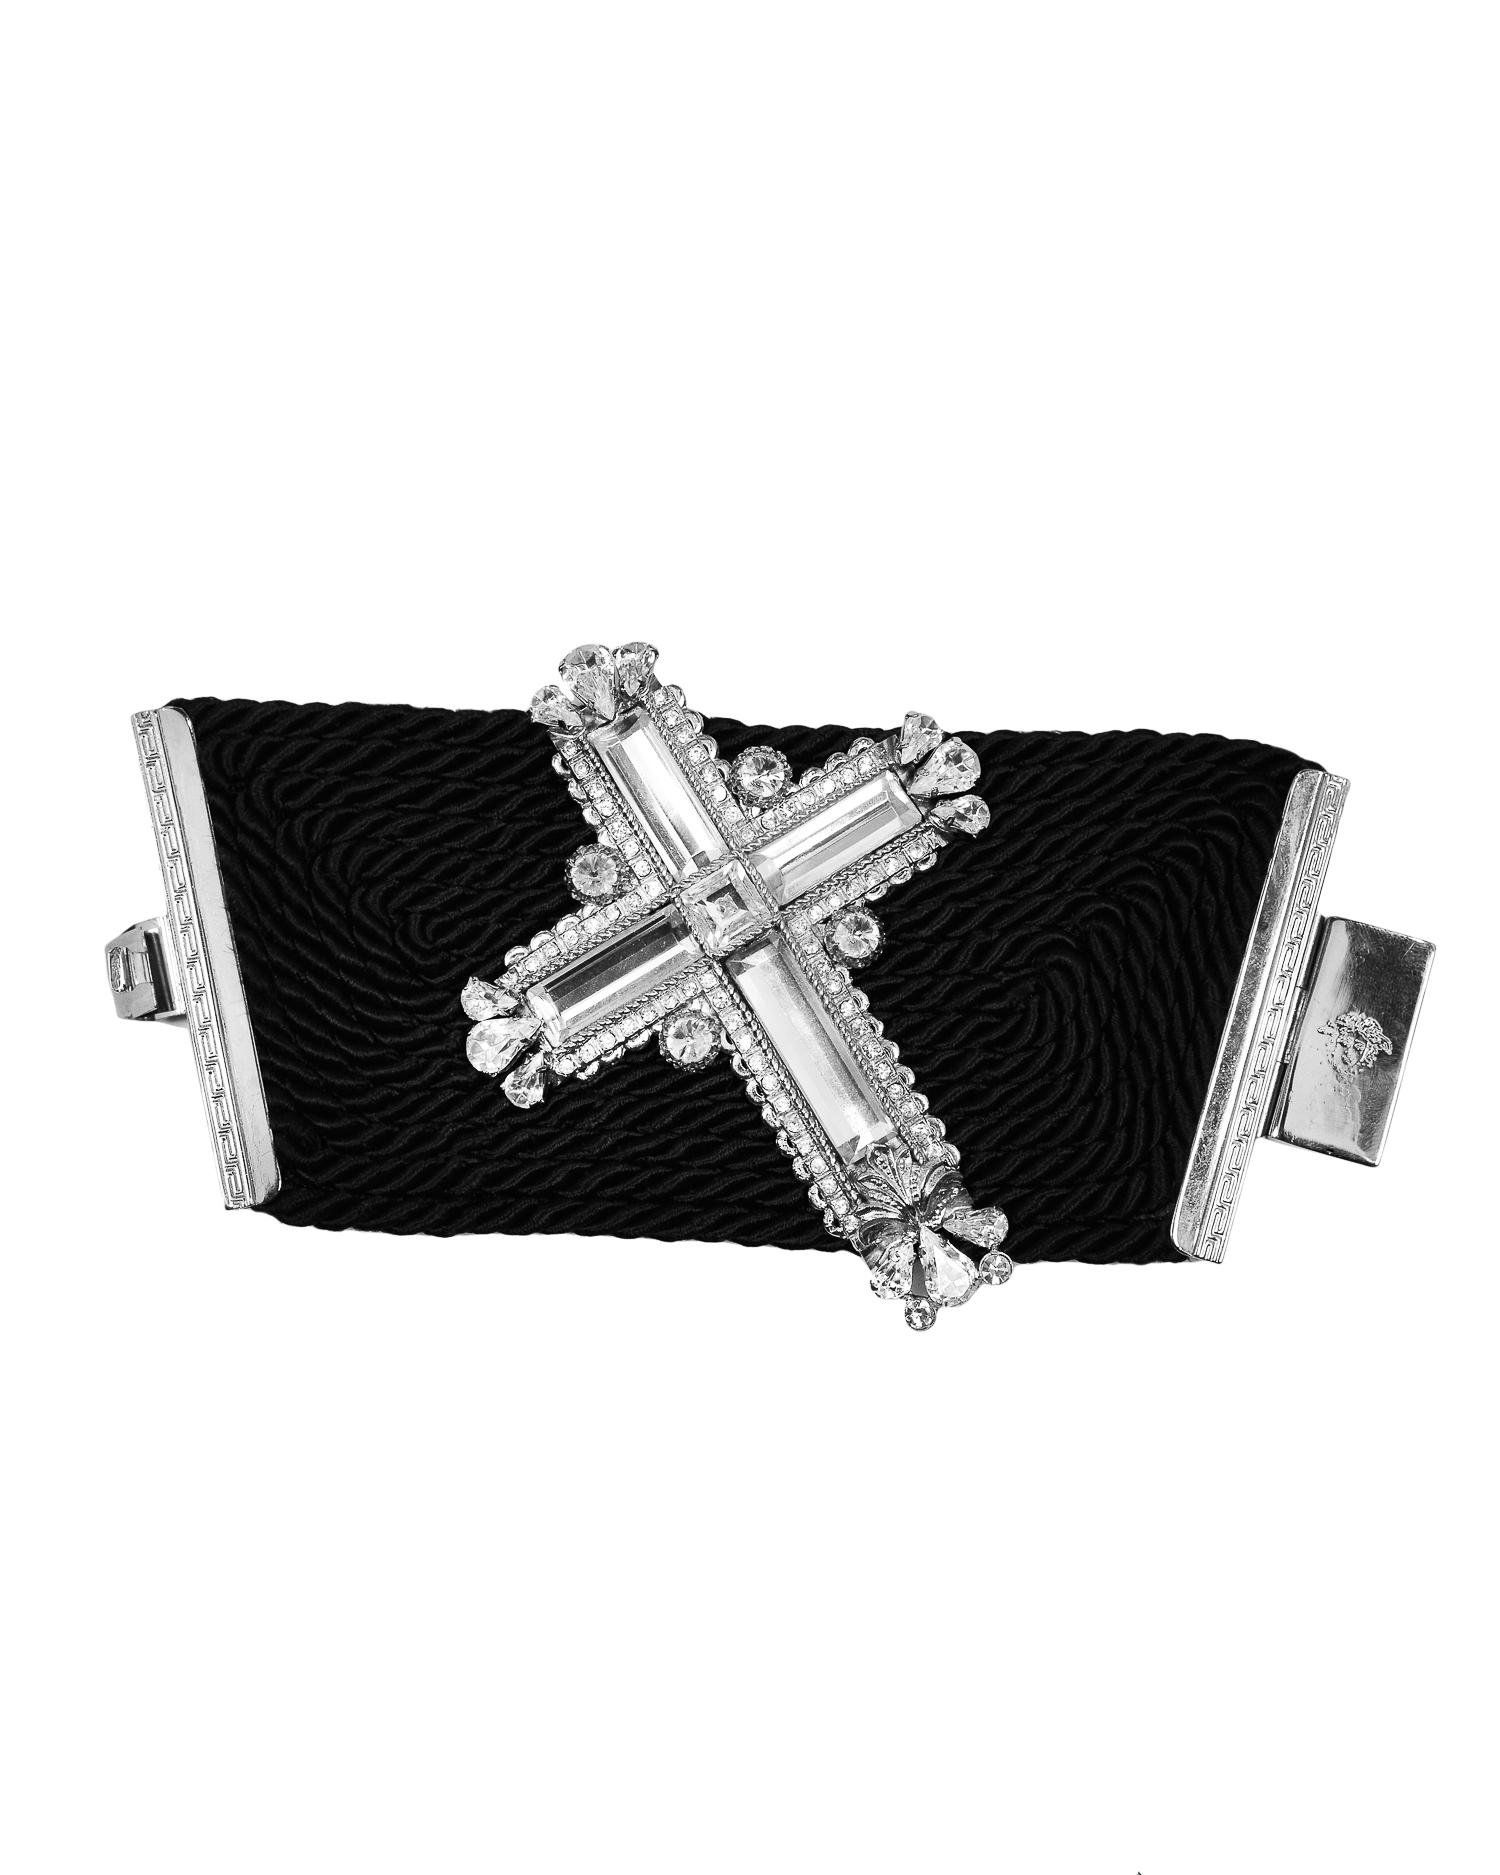 Vintage Gianni Versace black silk cord bracelet with large rhinestone embellished silver-tone cross with slide clasp closure. Circa 1990's. 

Excellent Condition.